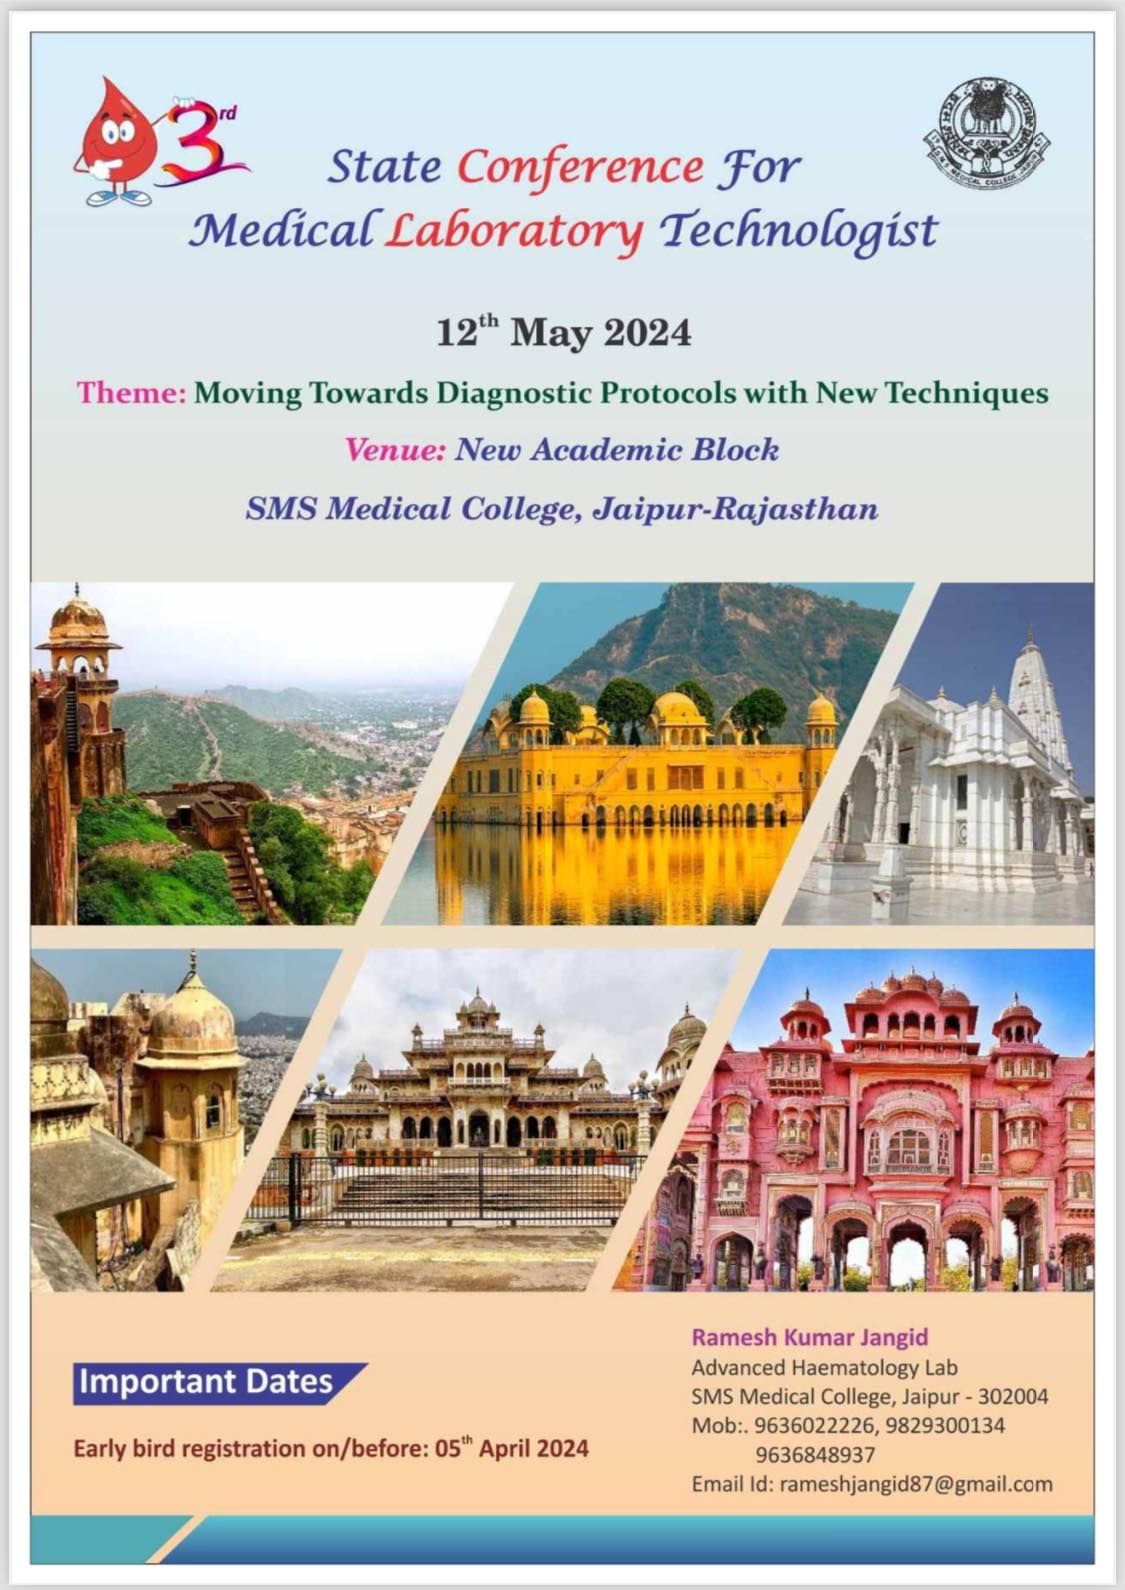 3rd State Conference for Medical Laboratory Technologist at SMS Medical College Jaipur